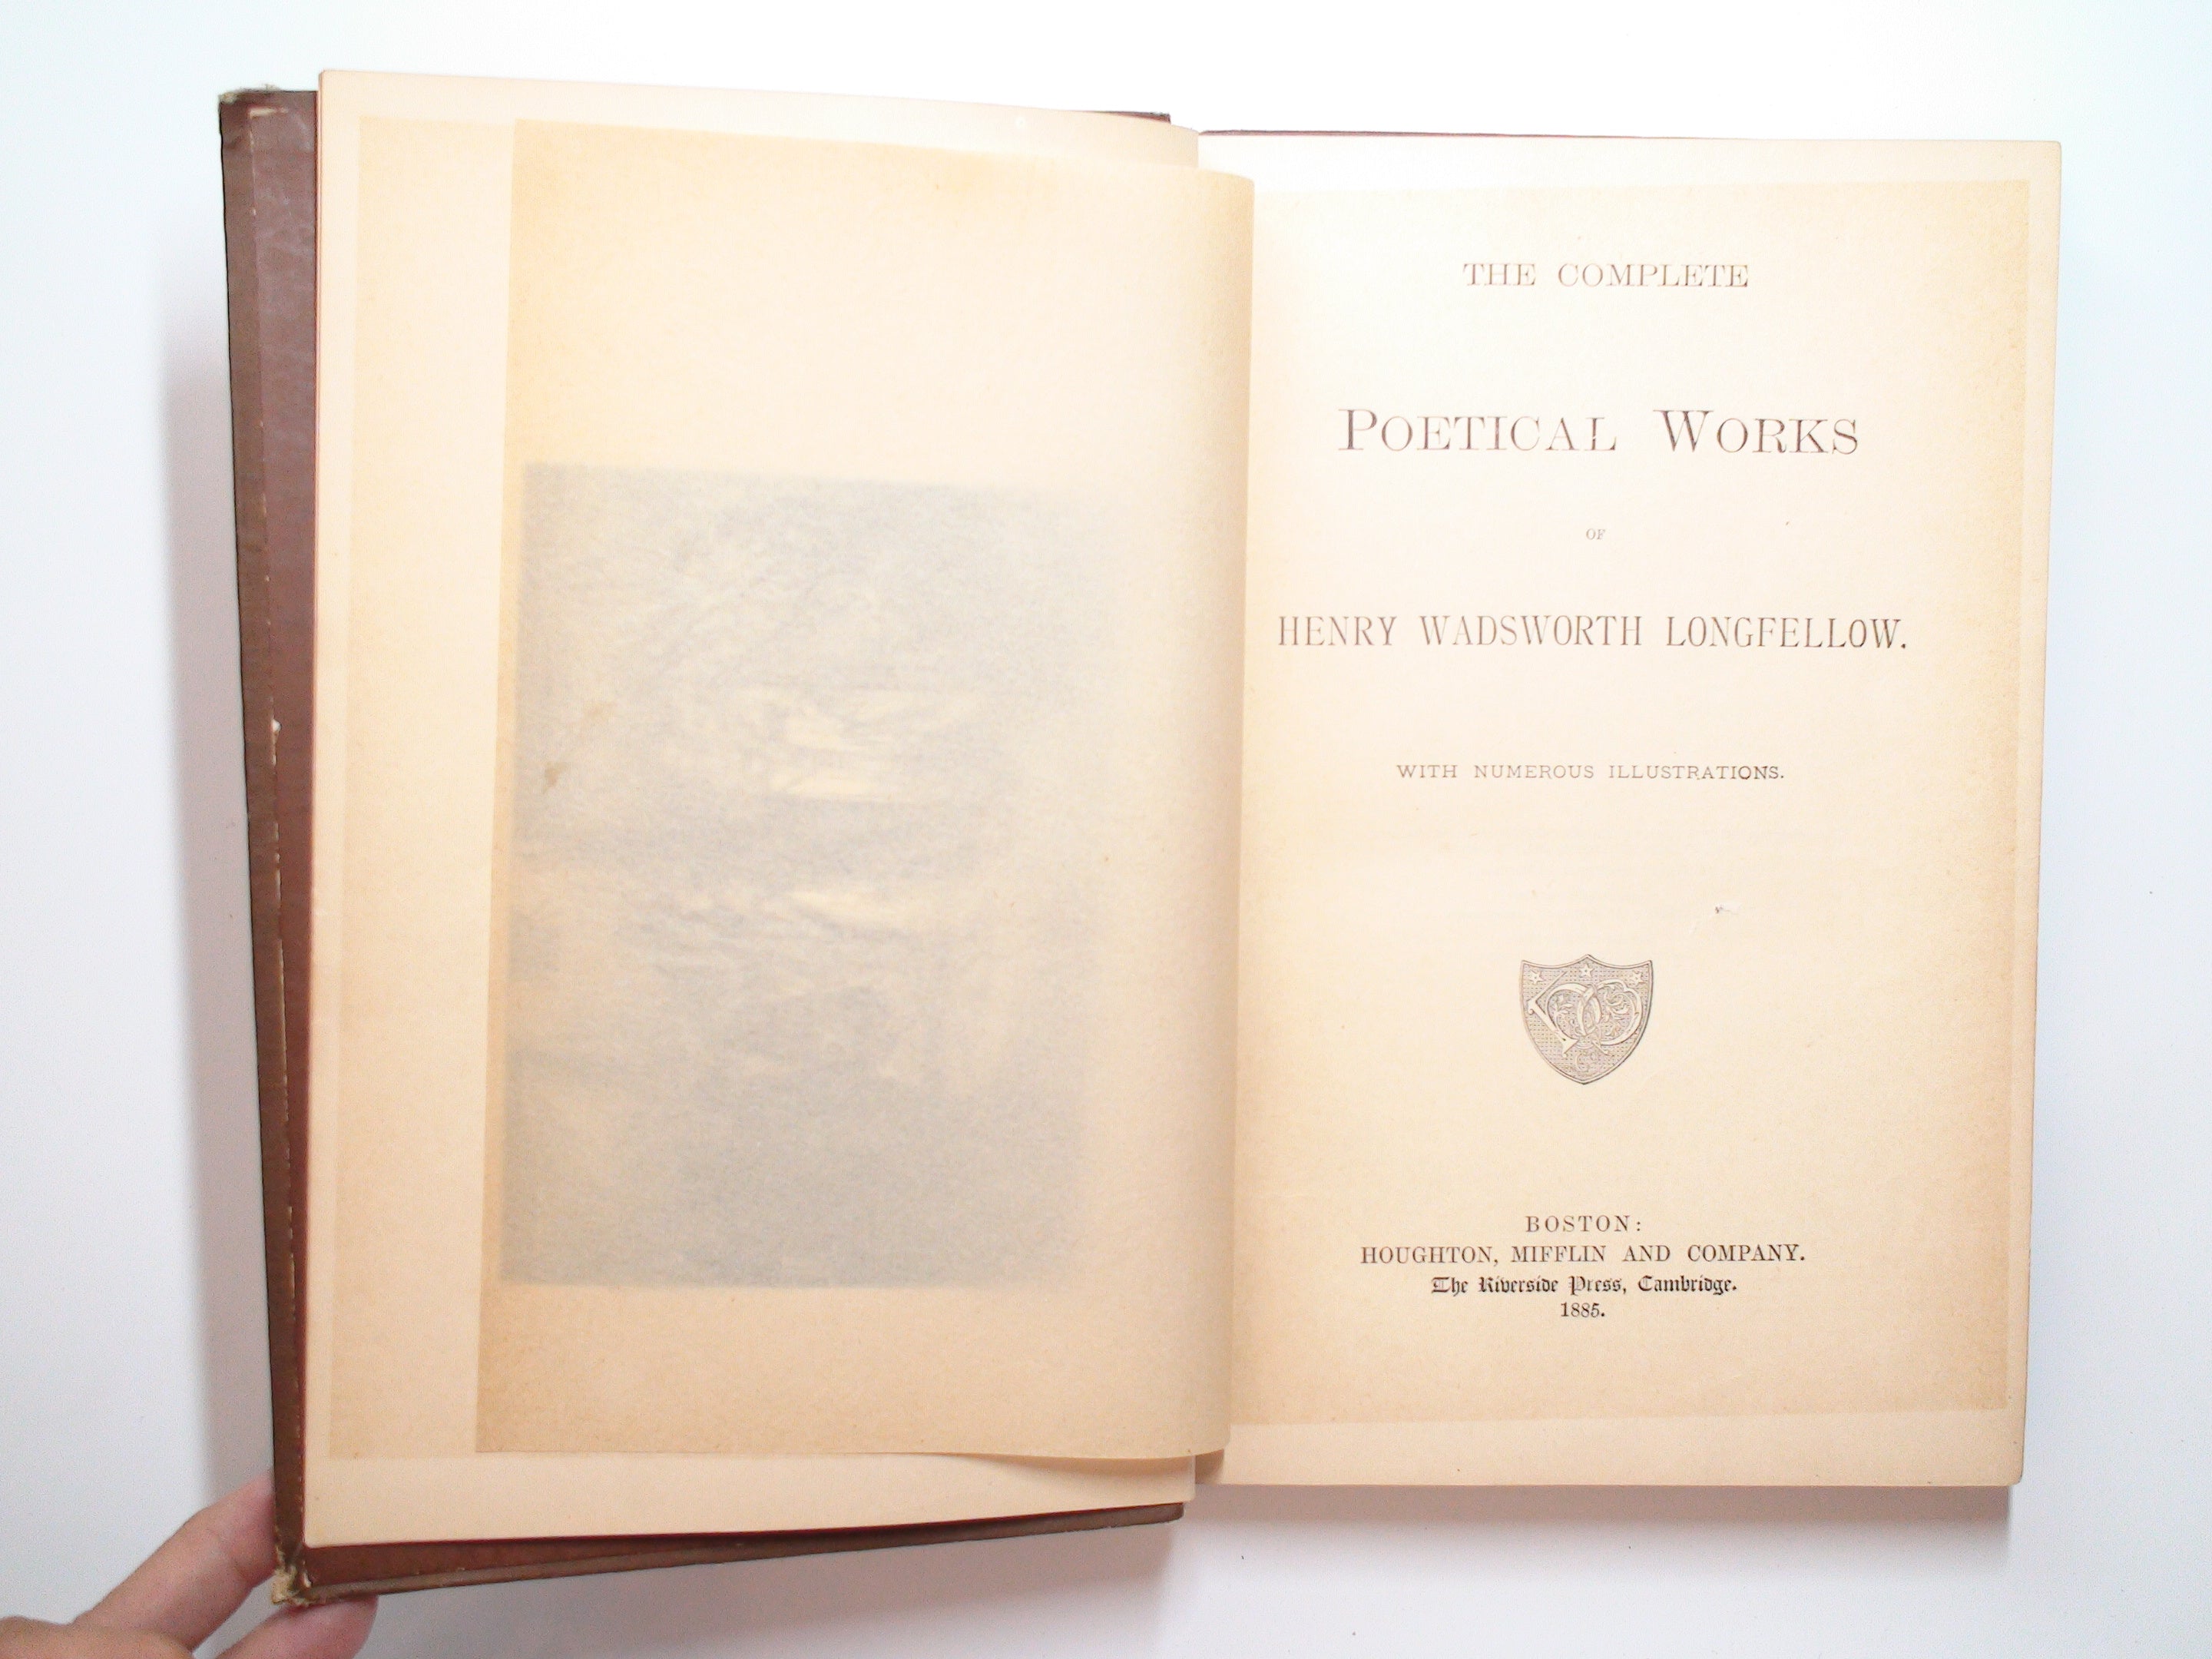 The Complete Poetical Works of Henry Wadsworth Longfellow, 1885